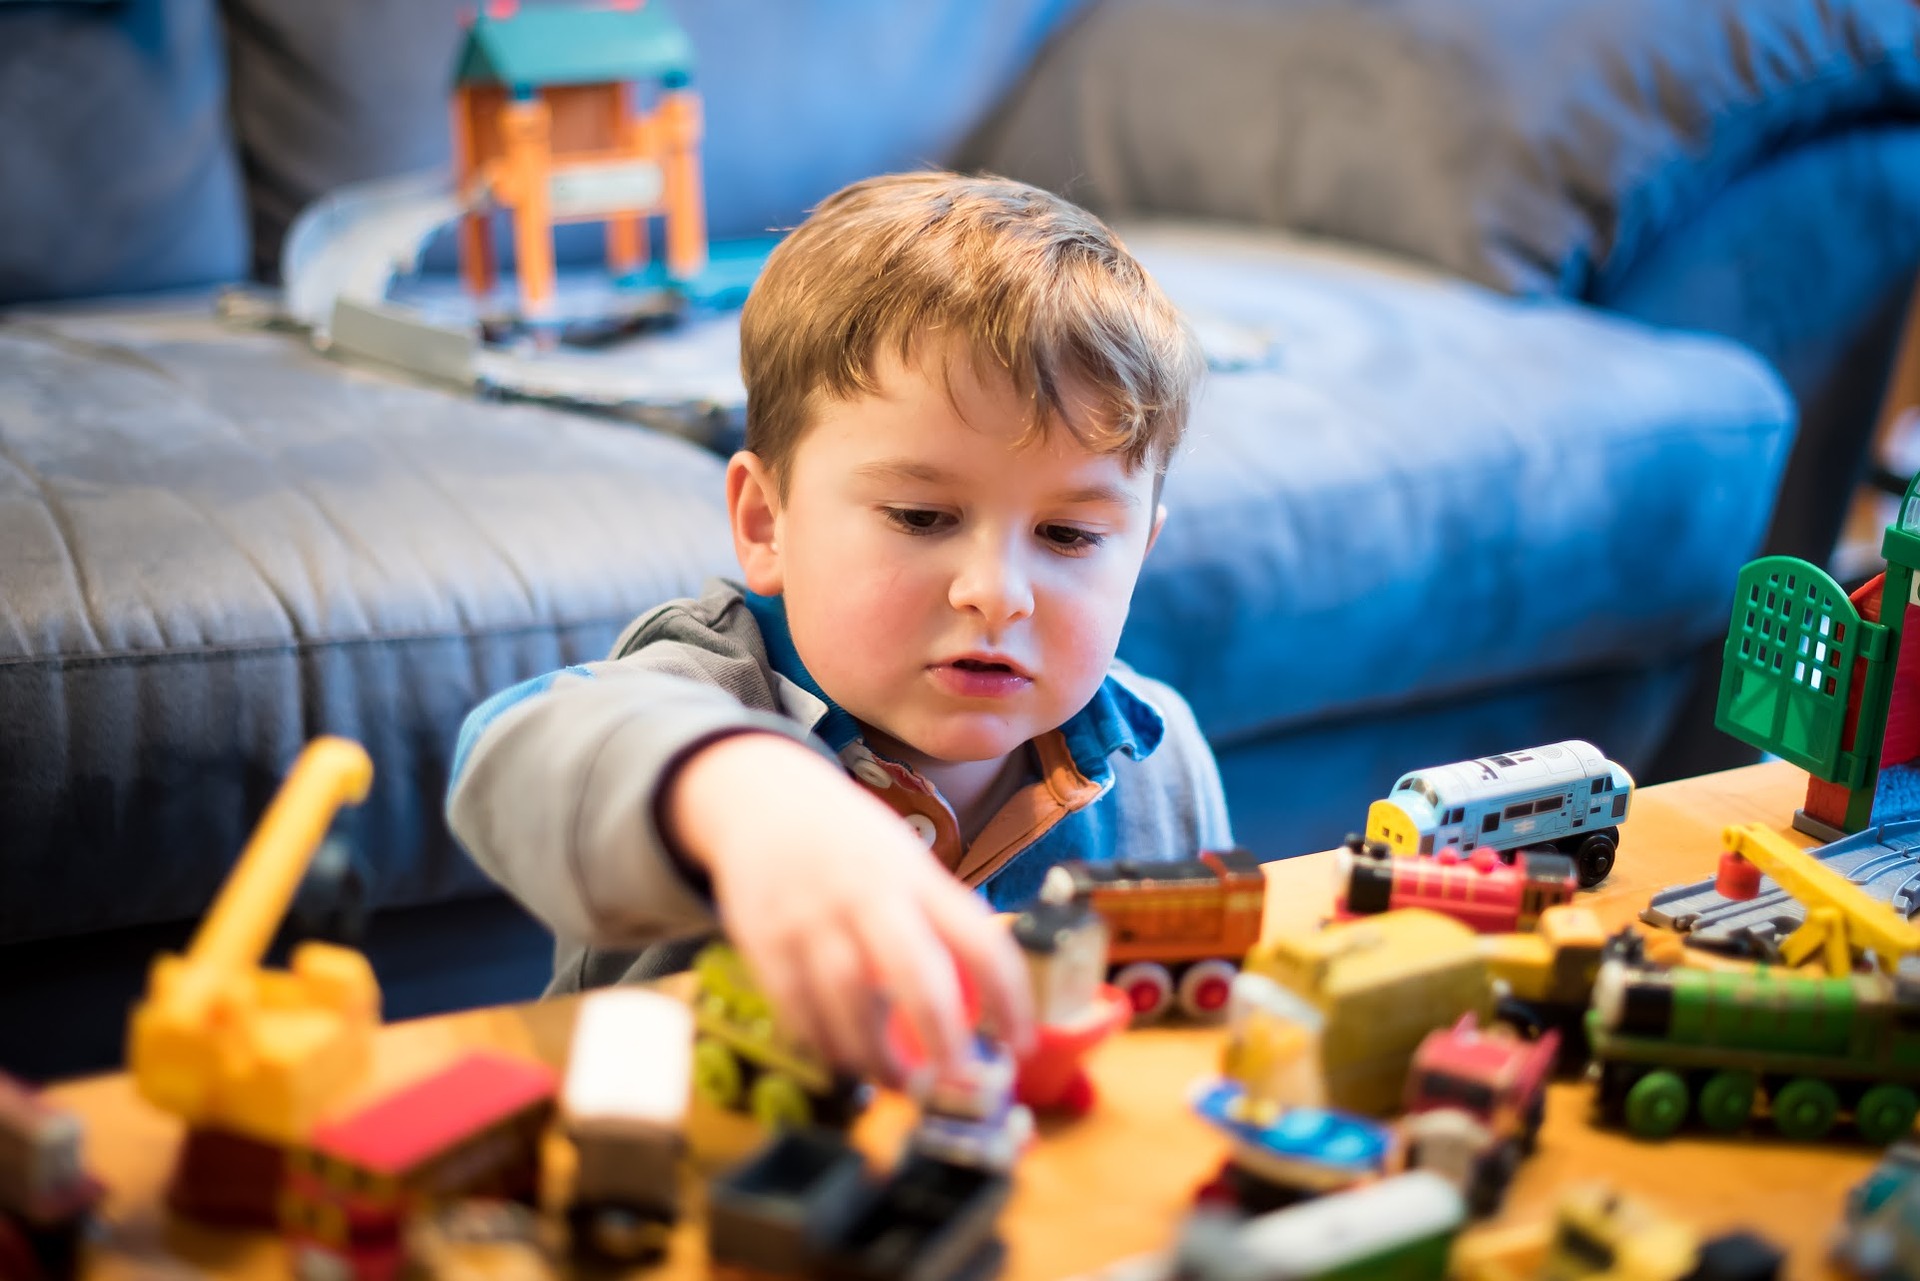 7 Fun Educational Toys and Gadgets to Keep Your Kids Entertained